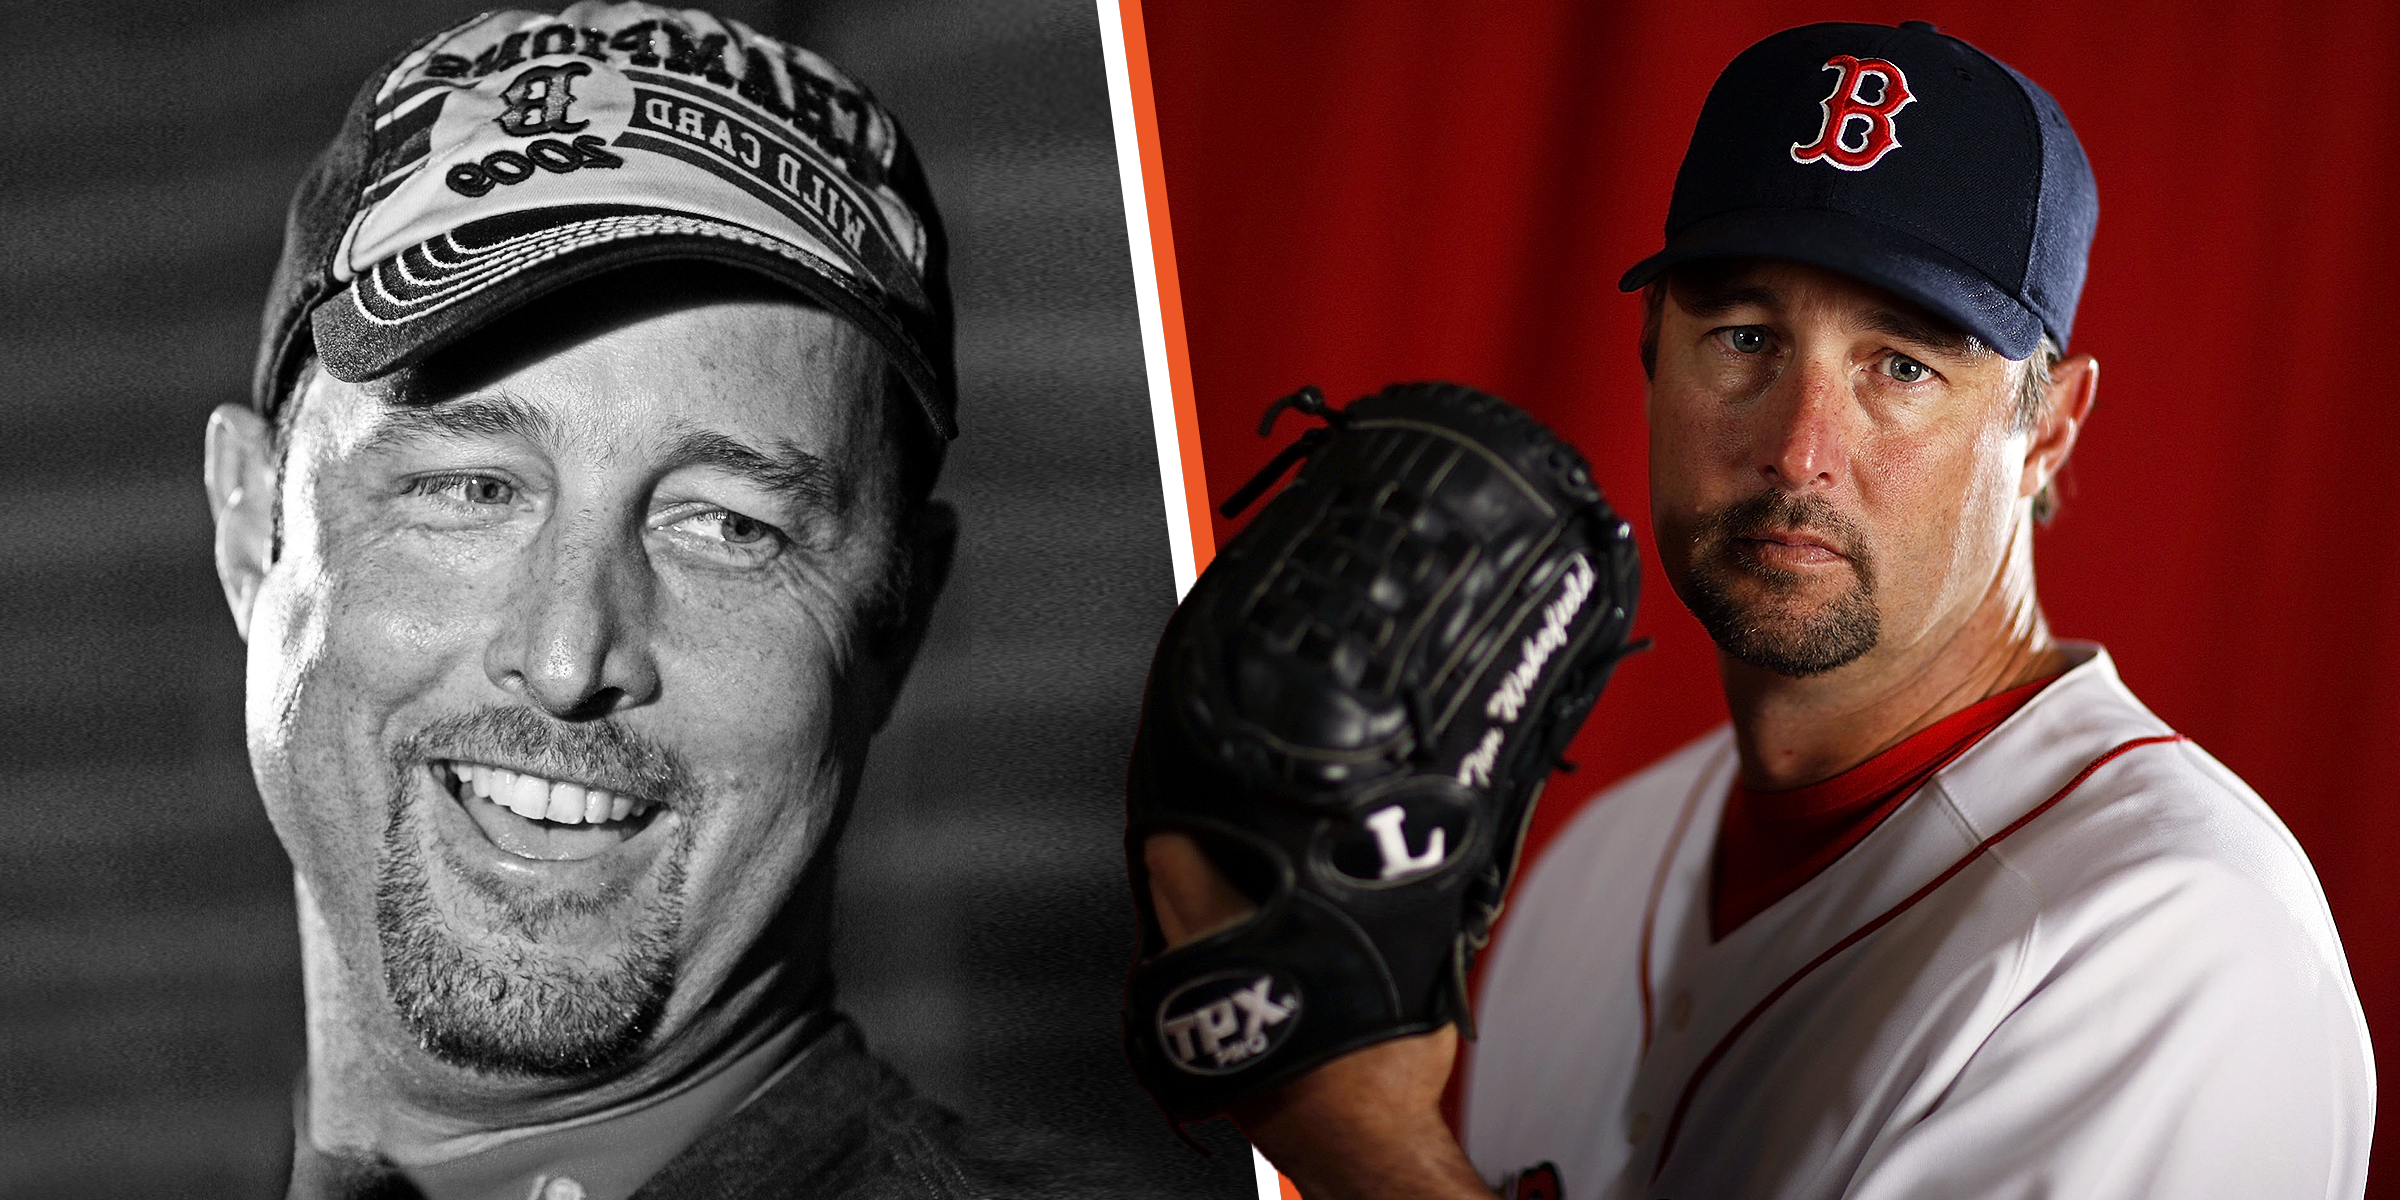 Tim Wakefield | Source: Getty Images